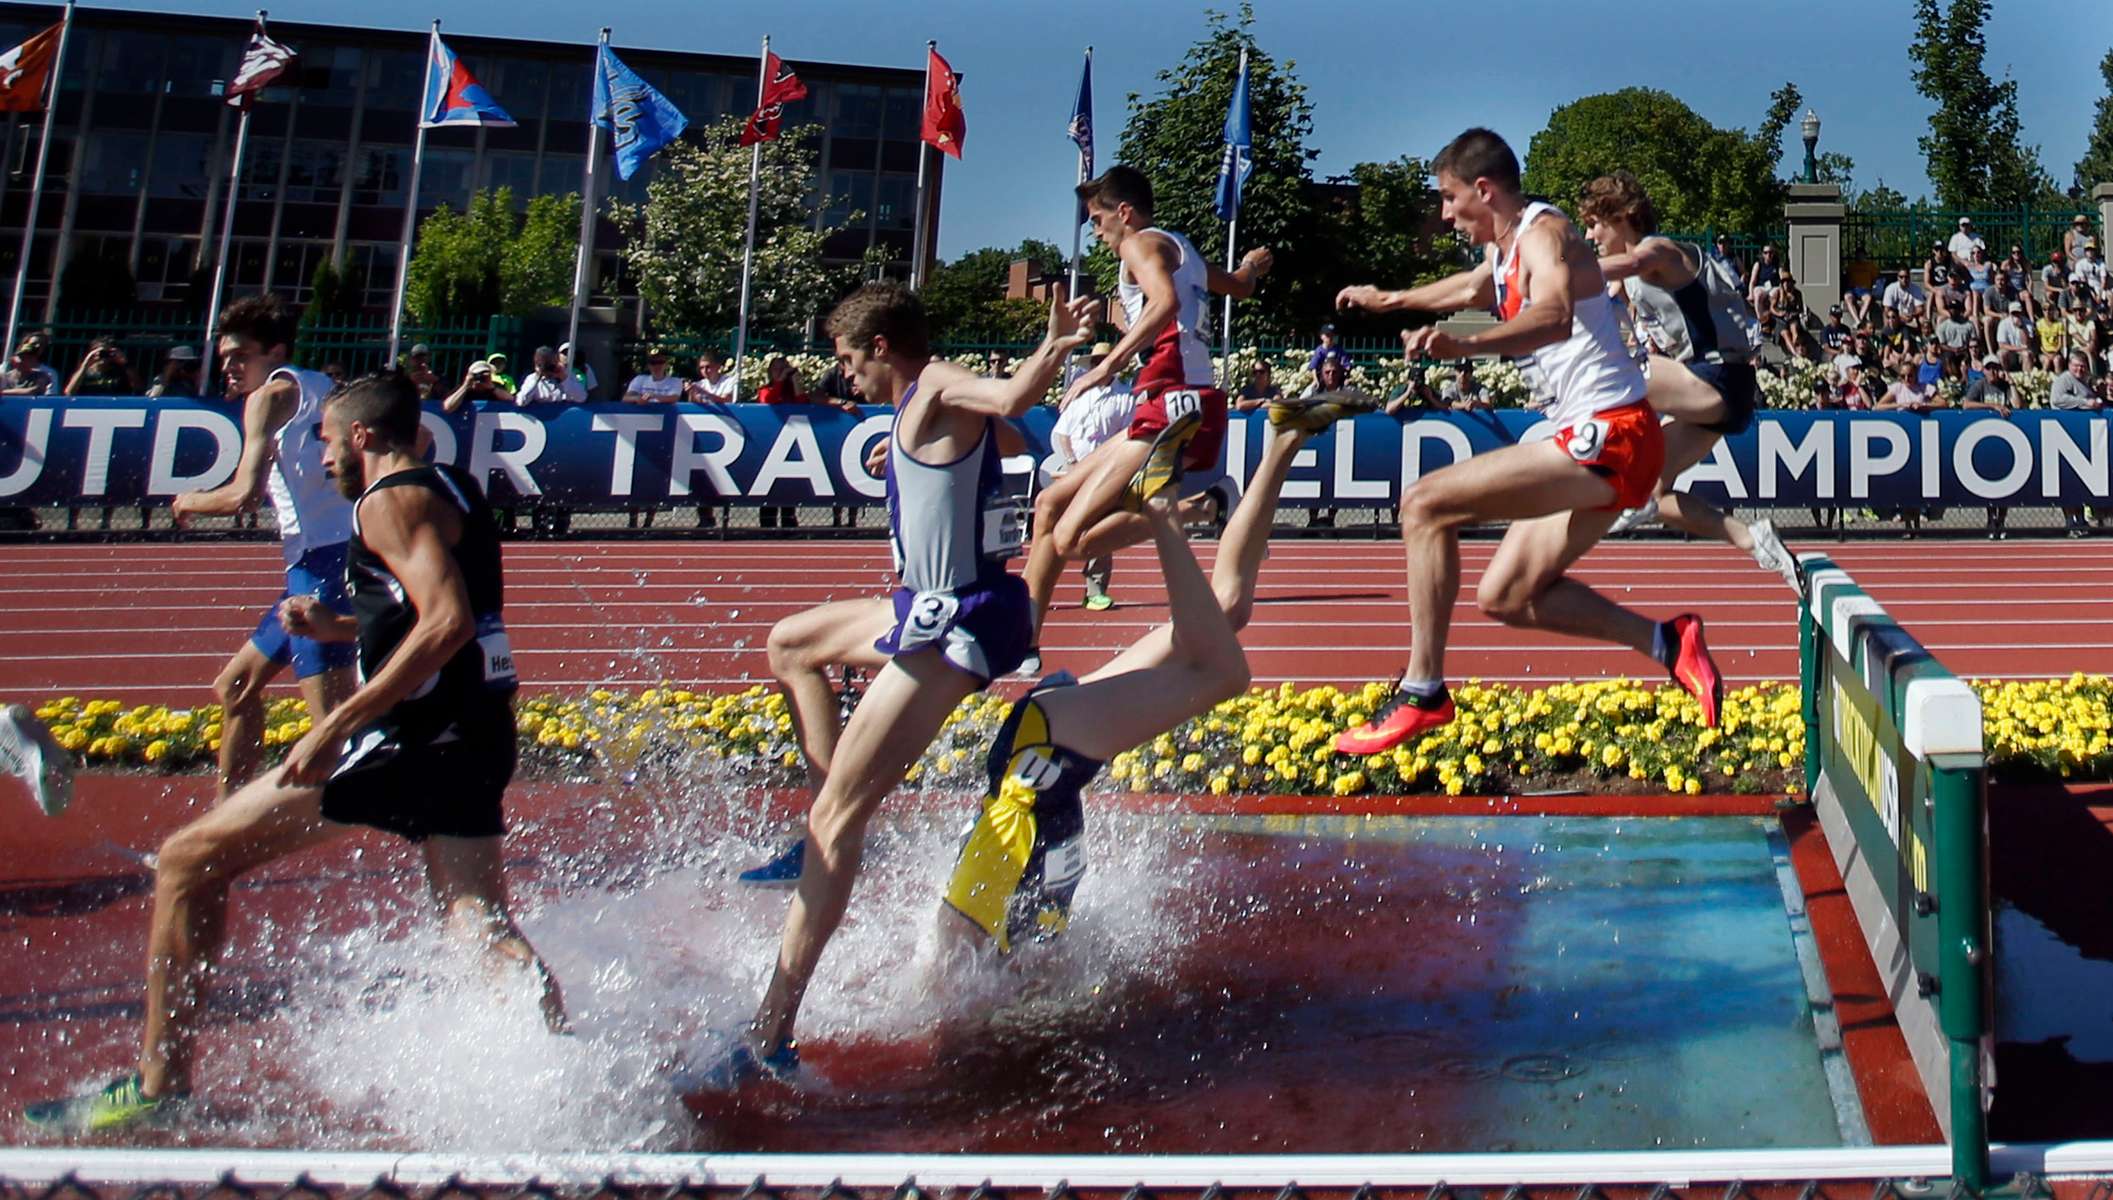 Michigan's Mason Ferlic nosedives into the water jump during the 3,000 steeplechase on the third day of the NCAA Track and Field Championships at Hayward Field in Eugene in 2015. Ferlic was unhurt in the incident.